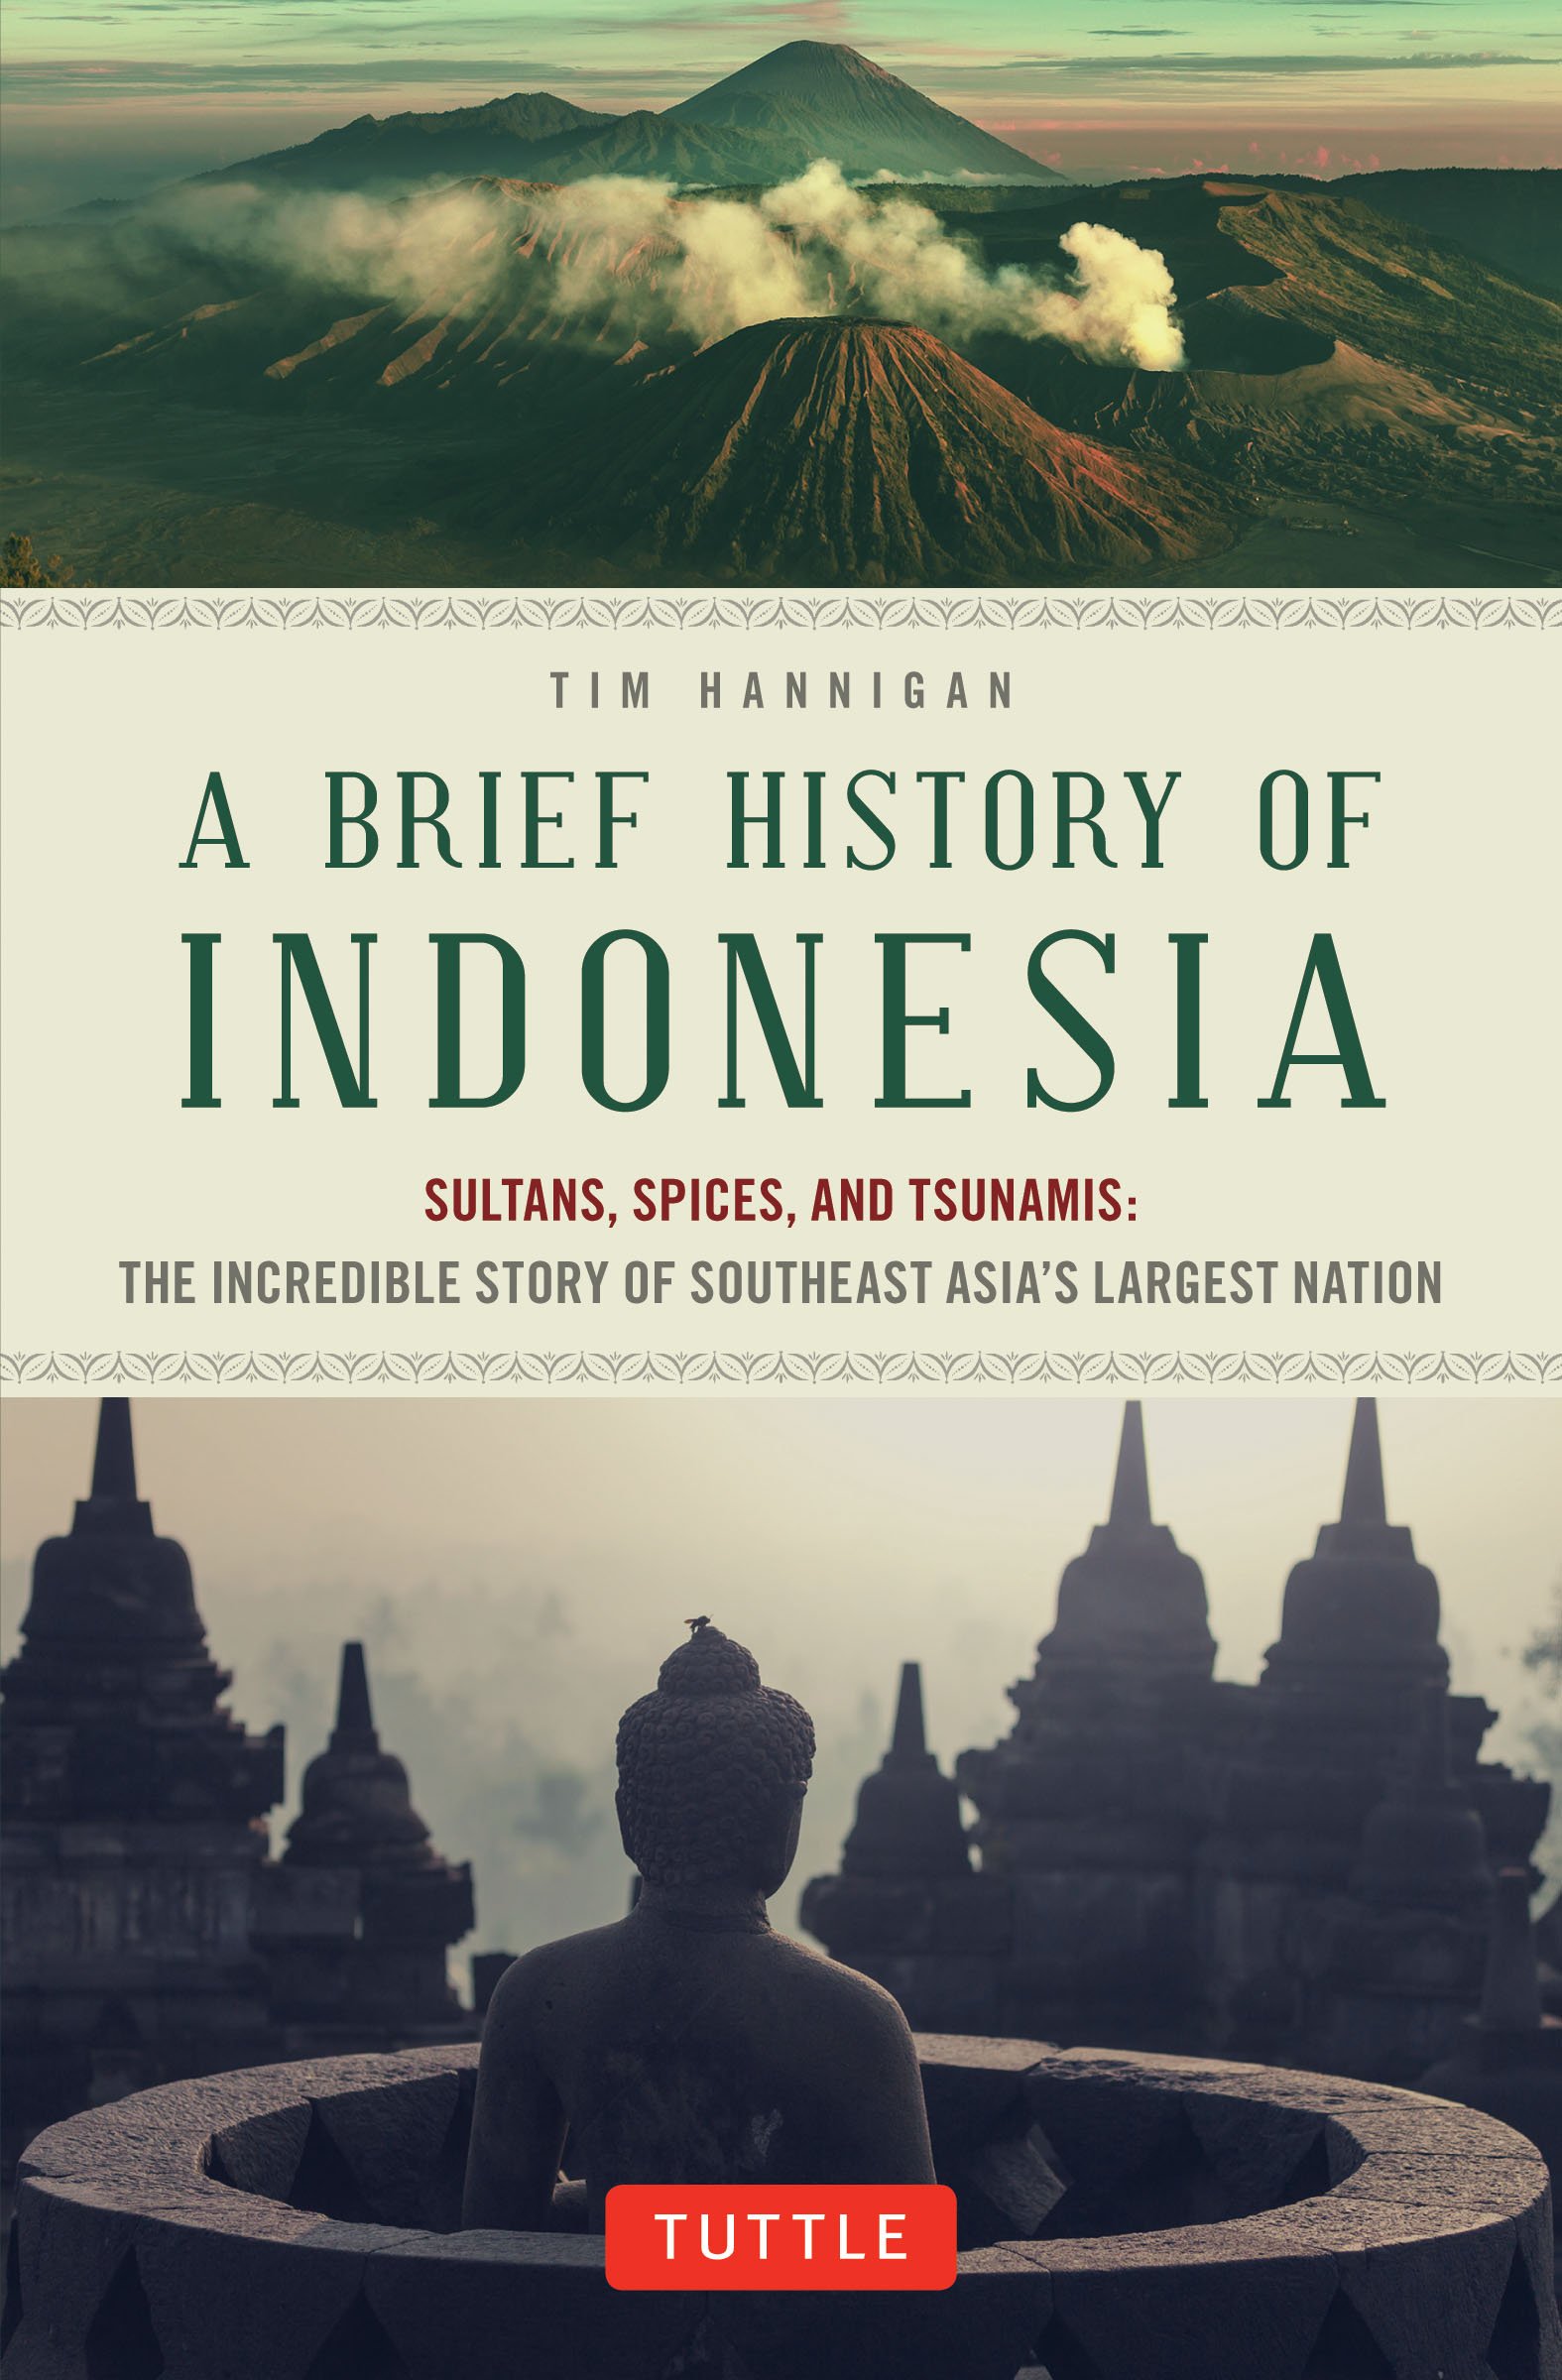 Brief History of Indonesia: Sultans, Spices, and Tsunamis: The Incredible Story of Southeast Asia's Largest Nation